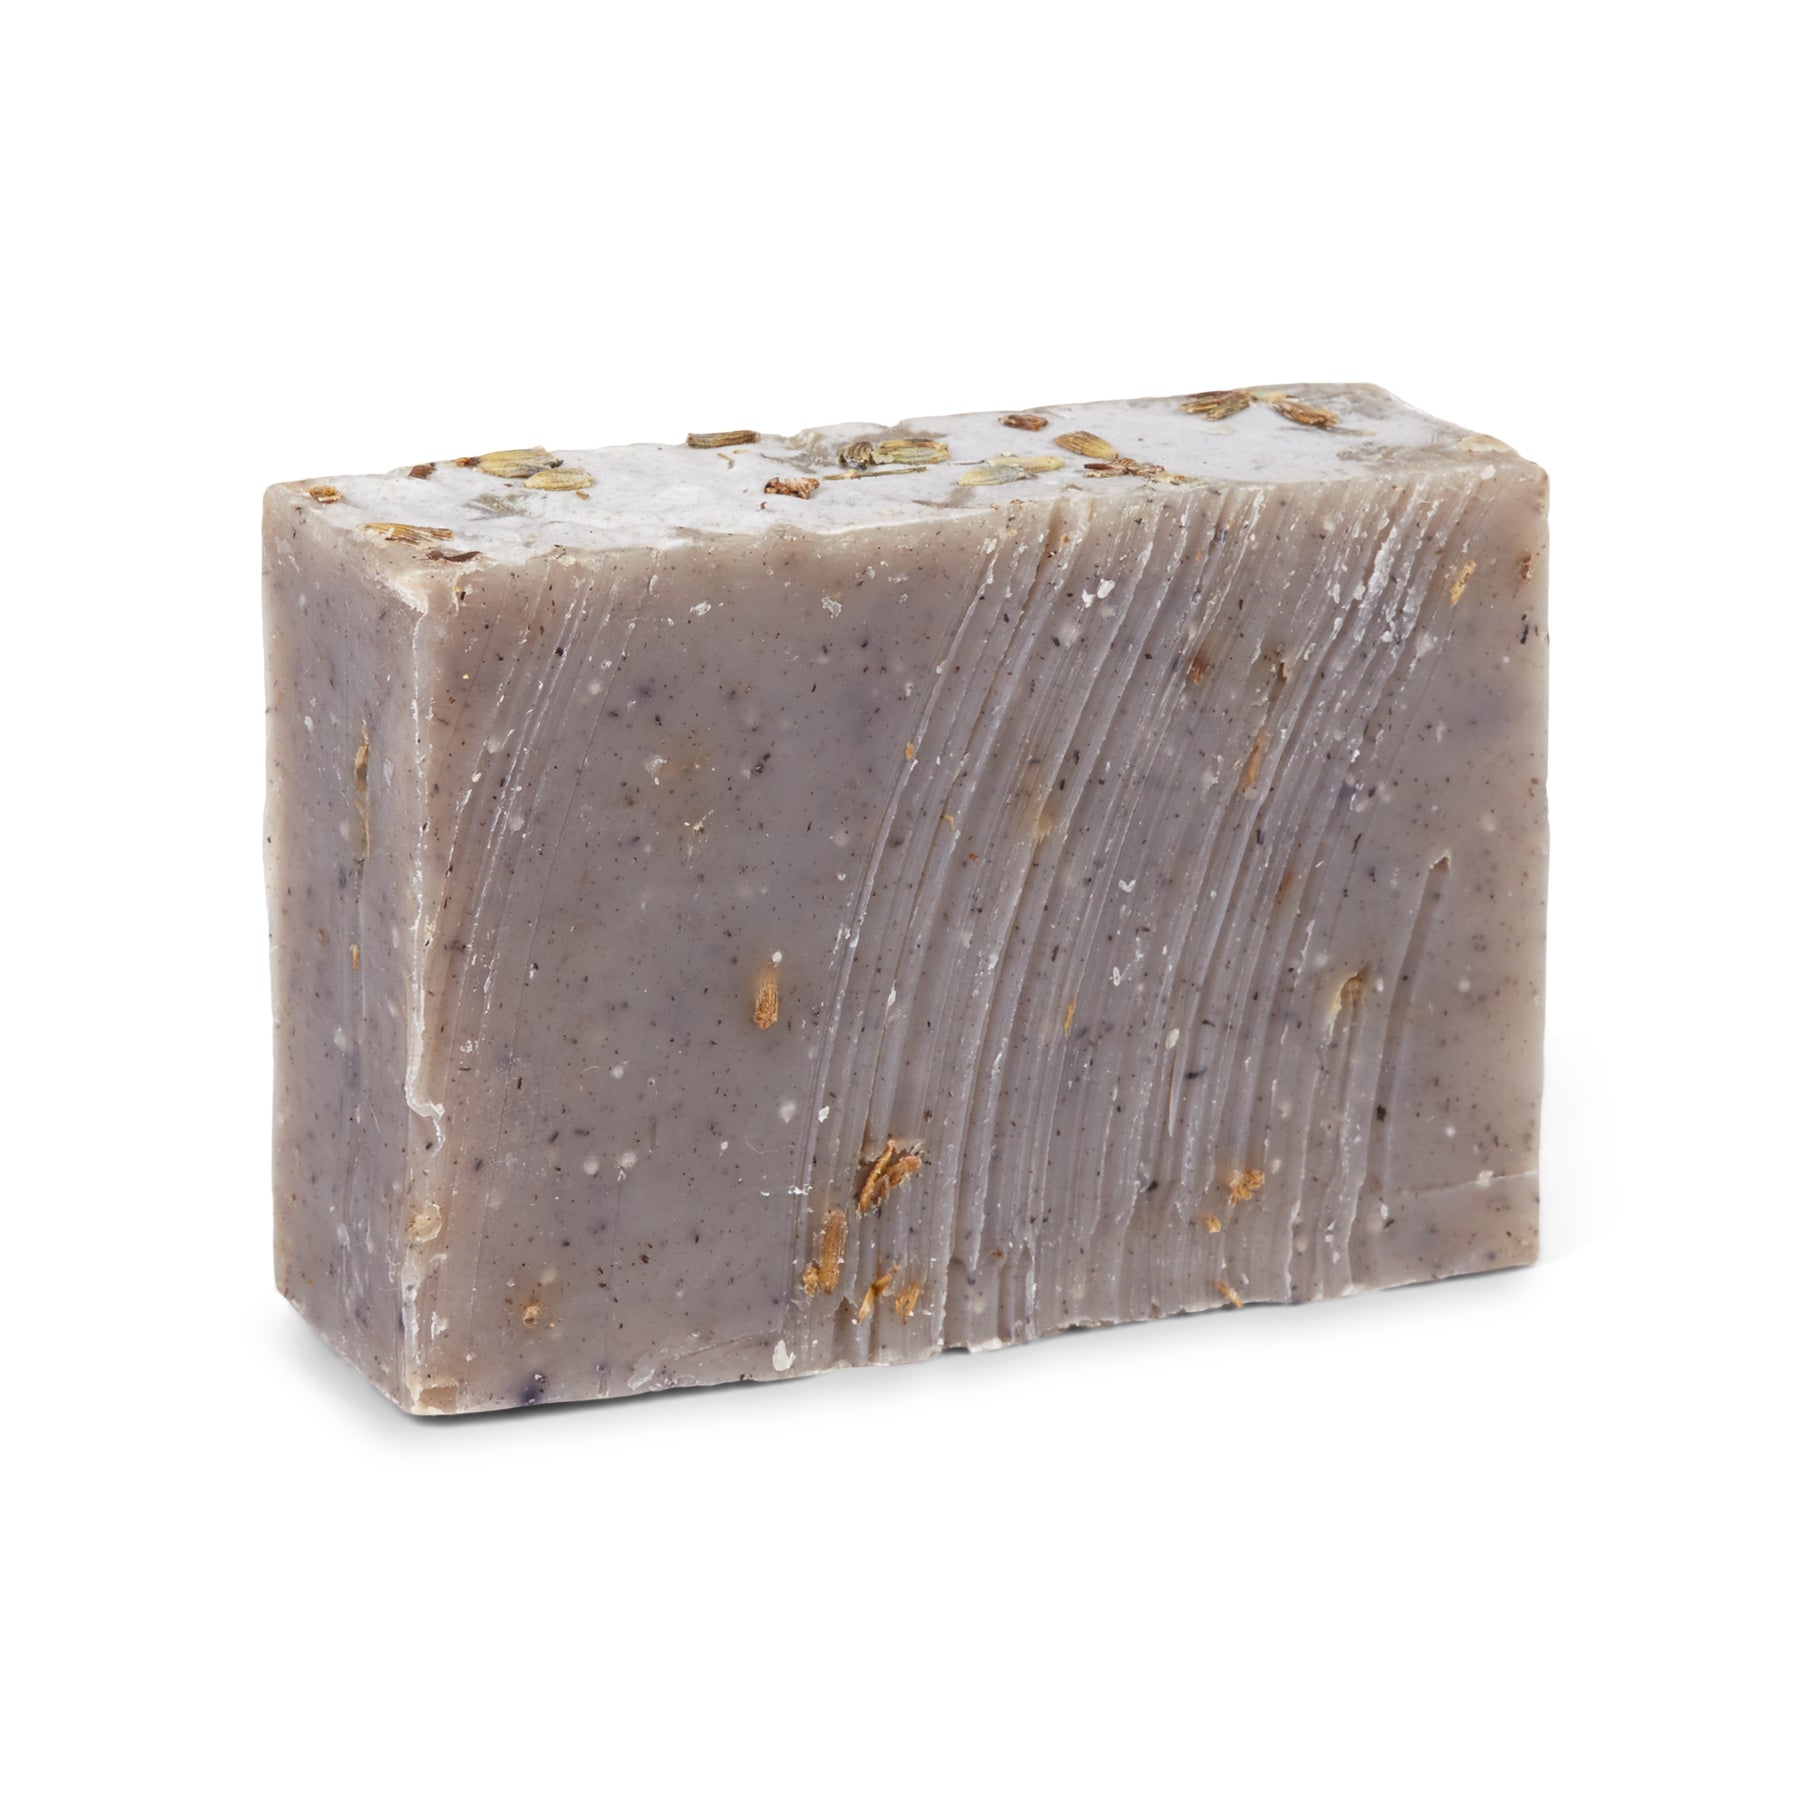 Money Bar Soap - Up To $100 In Each Bar